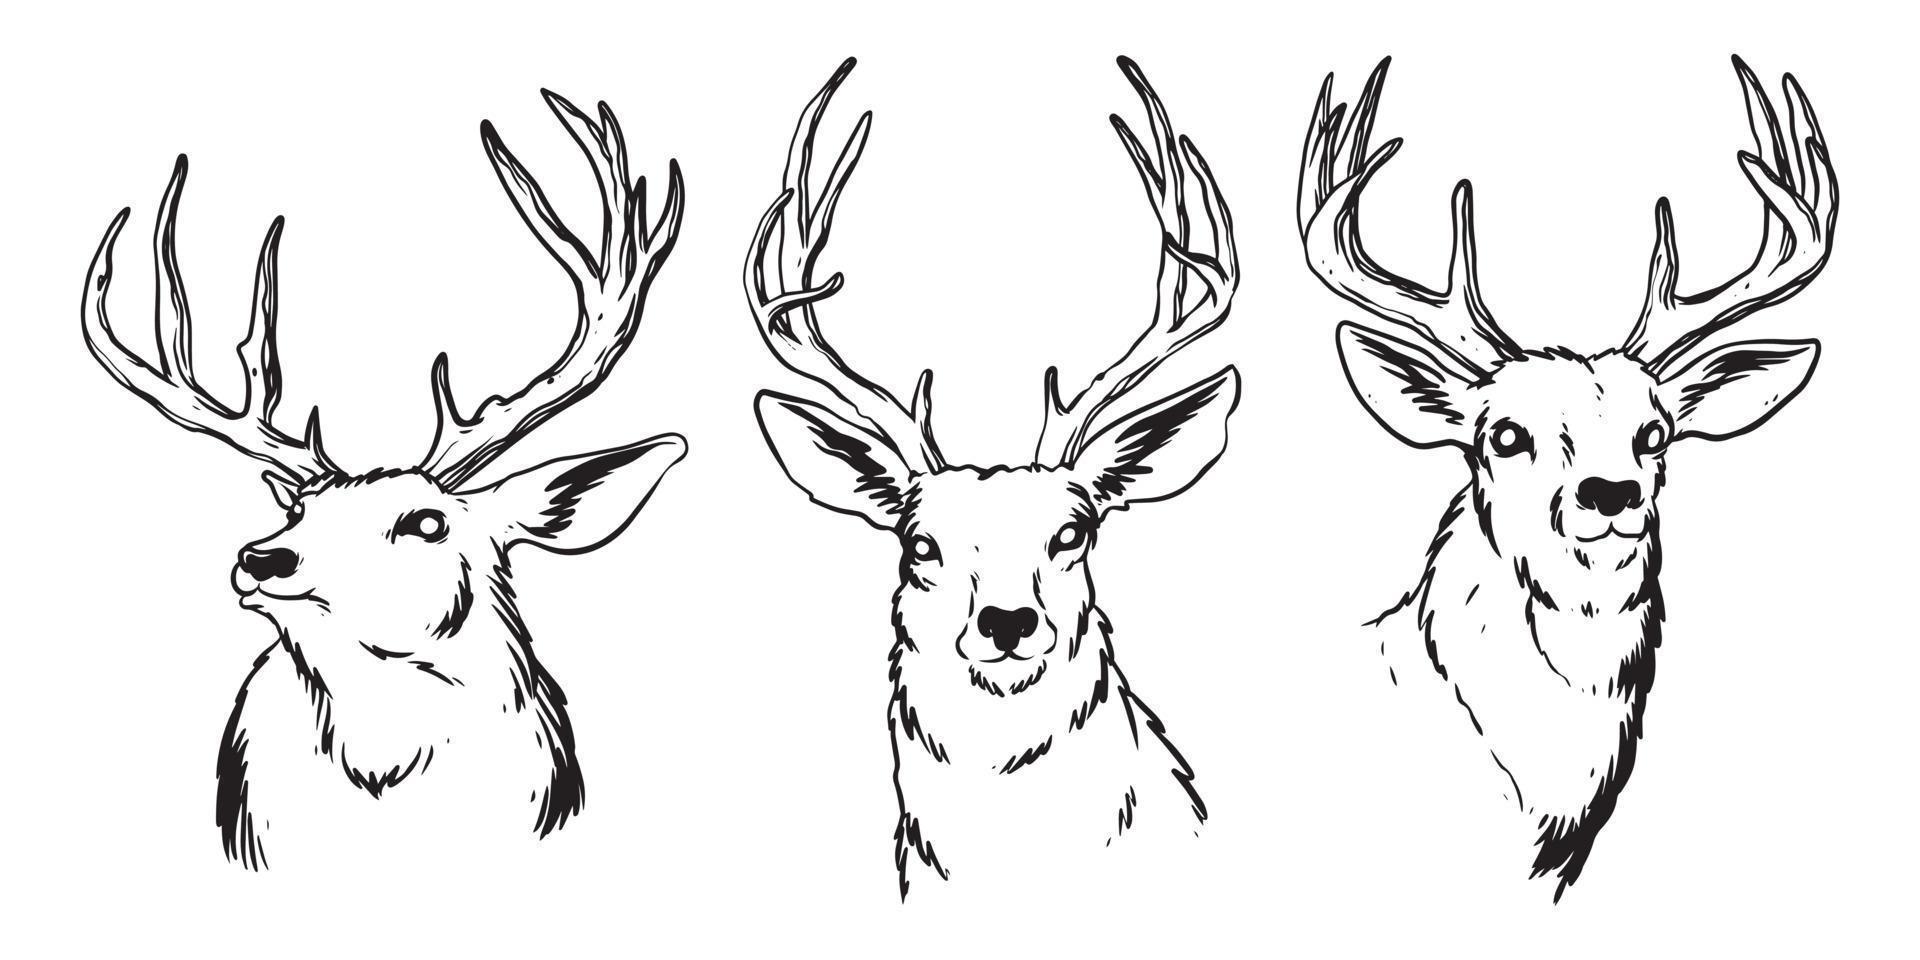 Hand-drawn deer heads lineart with details of feathers and shadows. isolated on white background, Design element for emblem, cover, background, sign, poster, label. Vector illustration